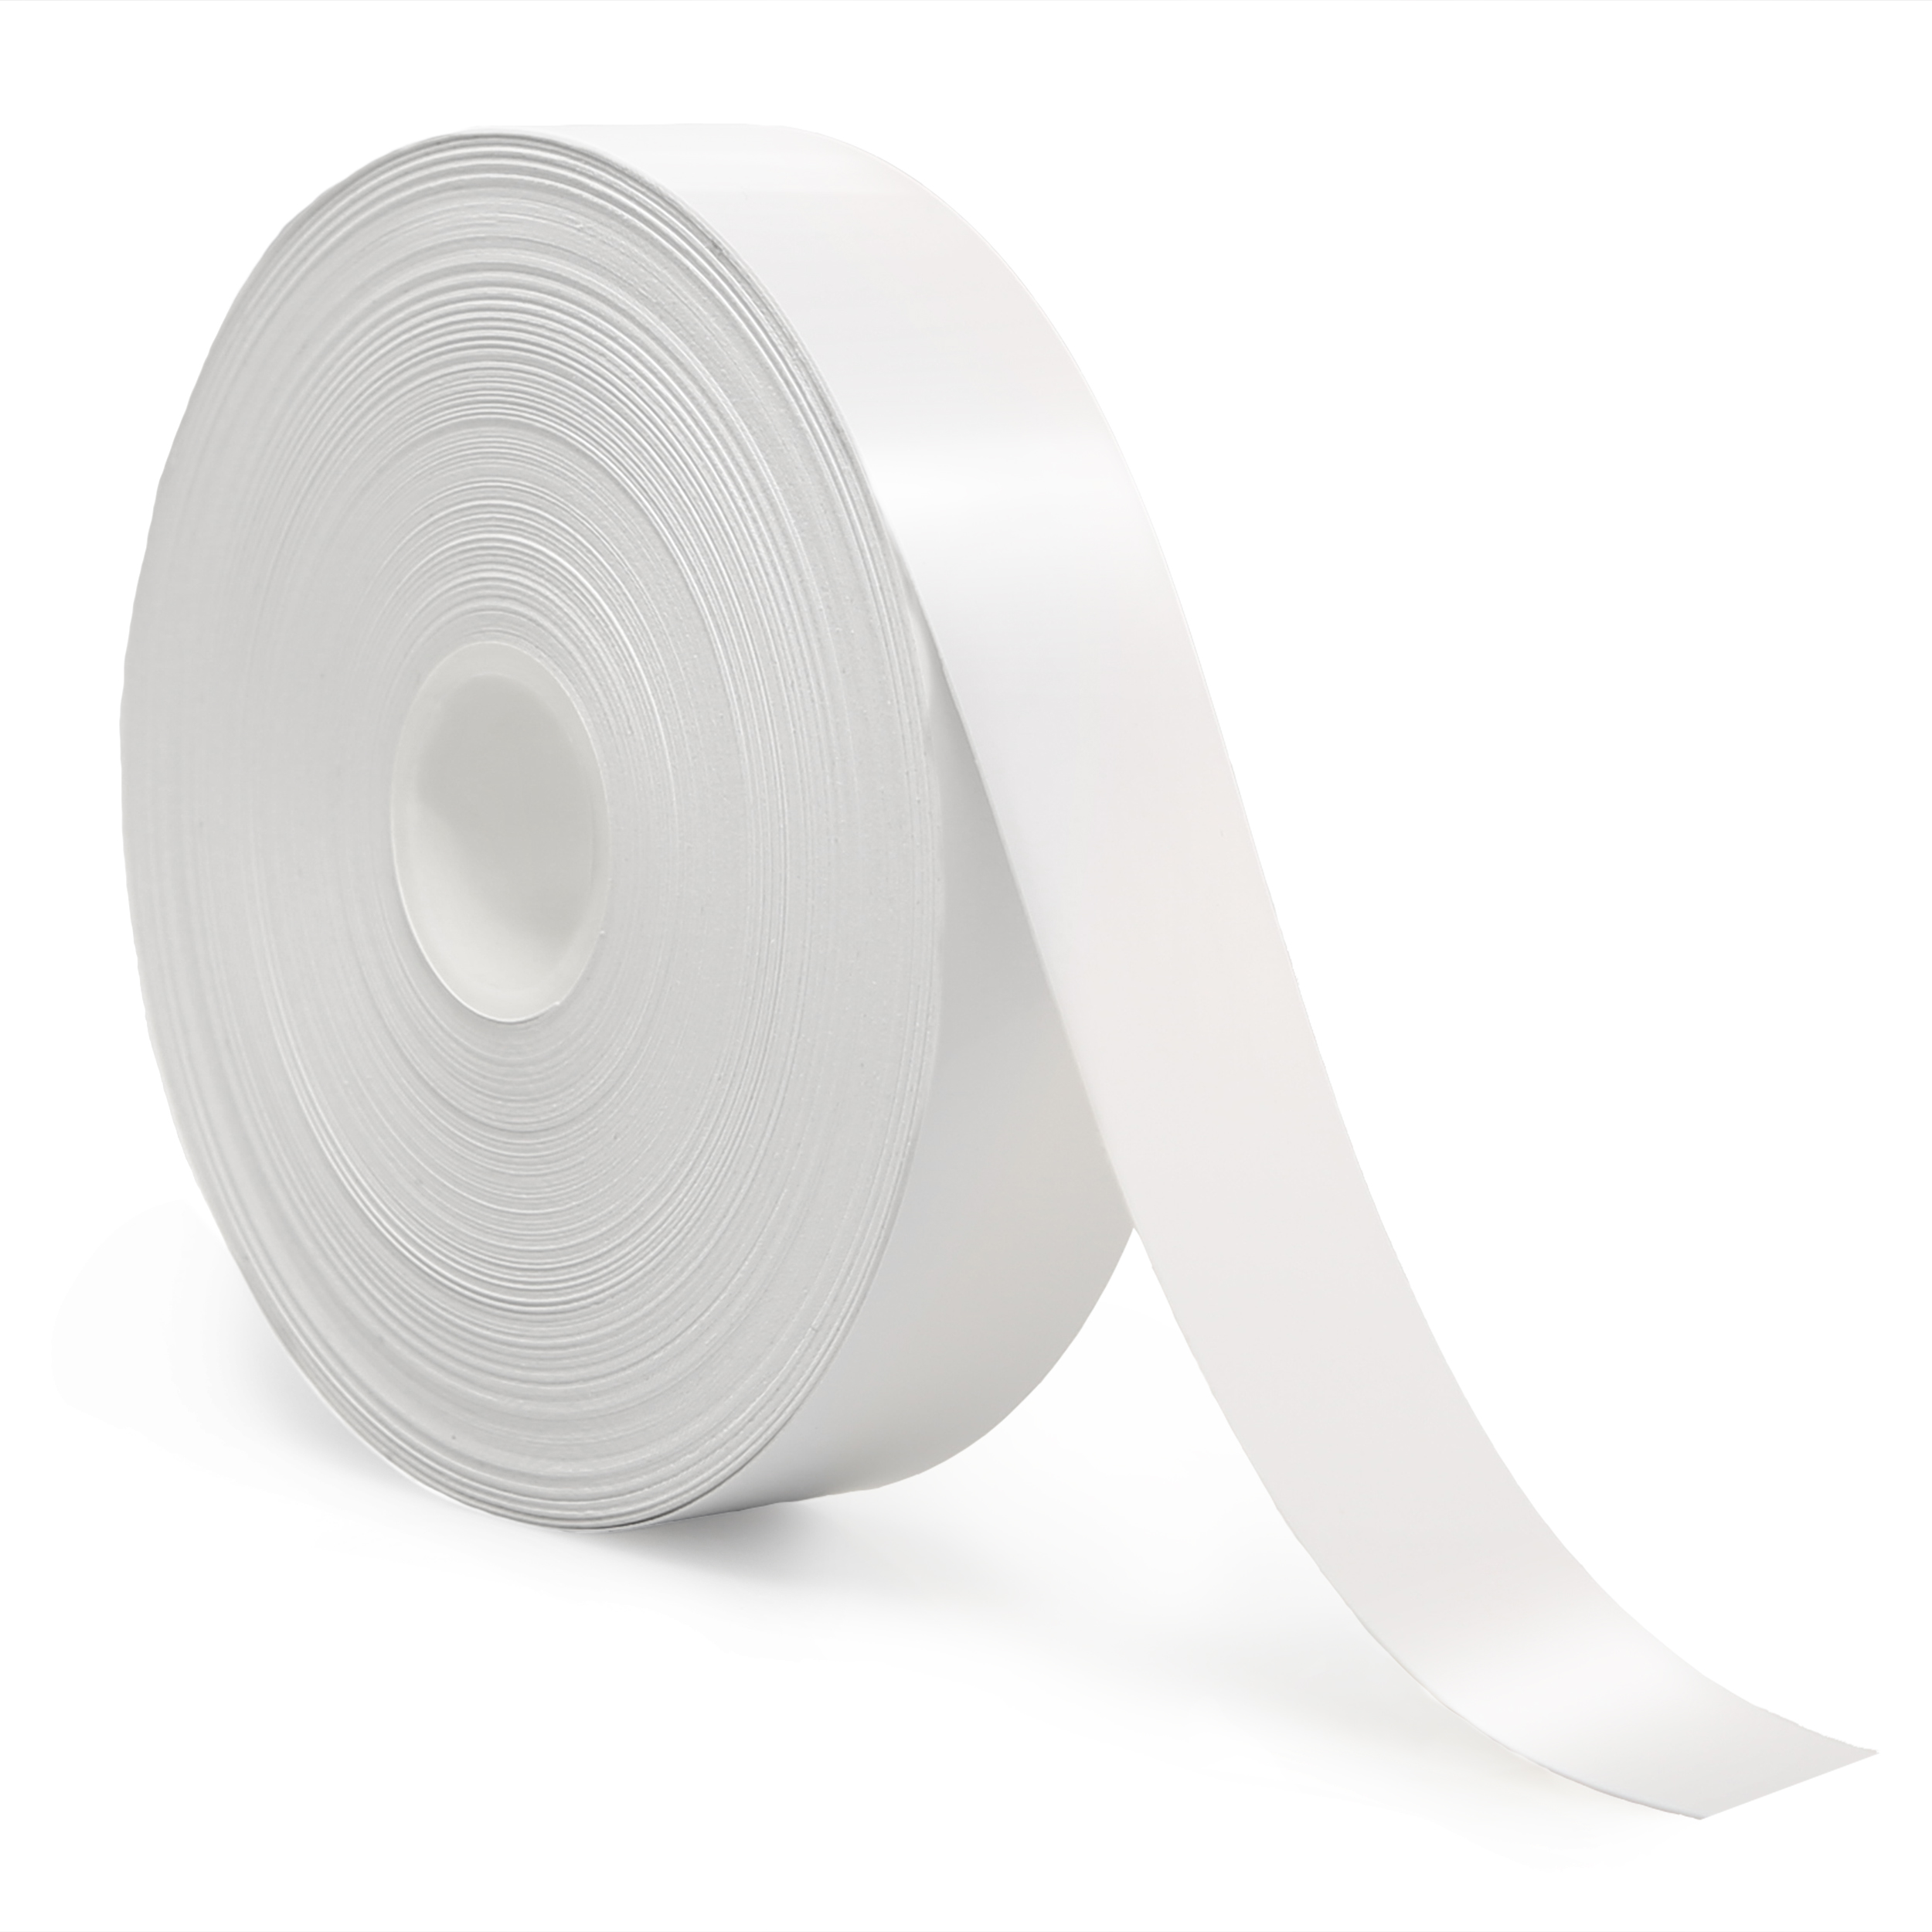 Detail view for 1" x 150ft Clear Premium Vinyl Labeling Tape